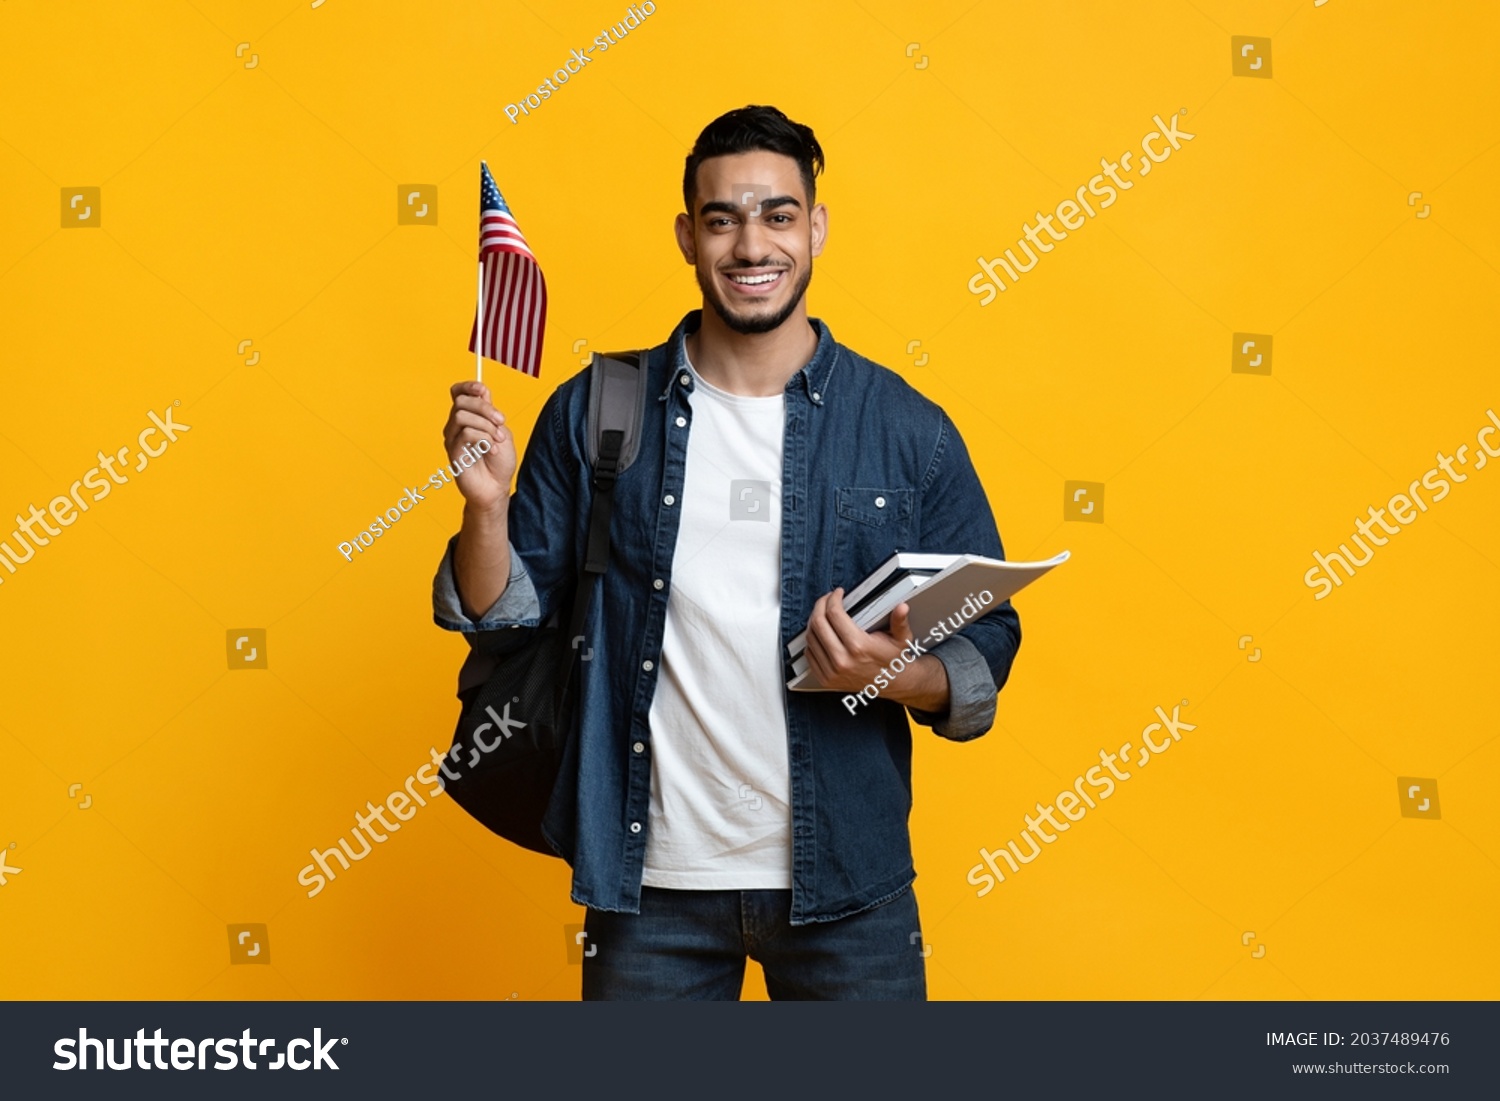 Smiling arab guy student with backpack and bunch of books showing flag of the US over yellow studio background, copy space. Positive middle-eastern young man studying English at school #2037489476